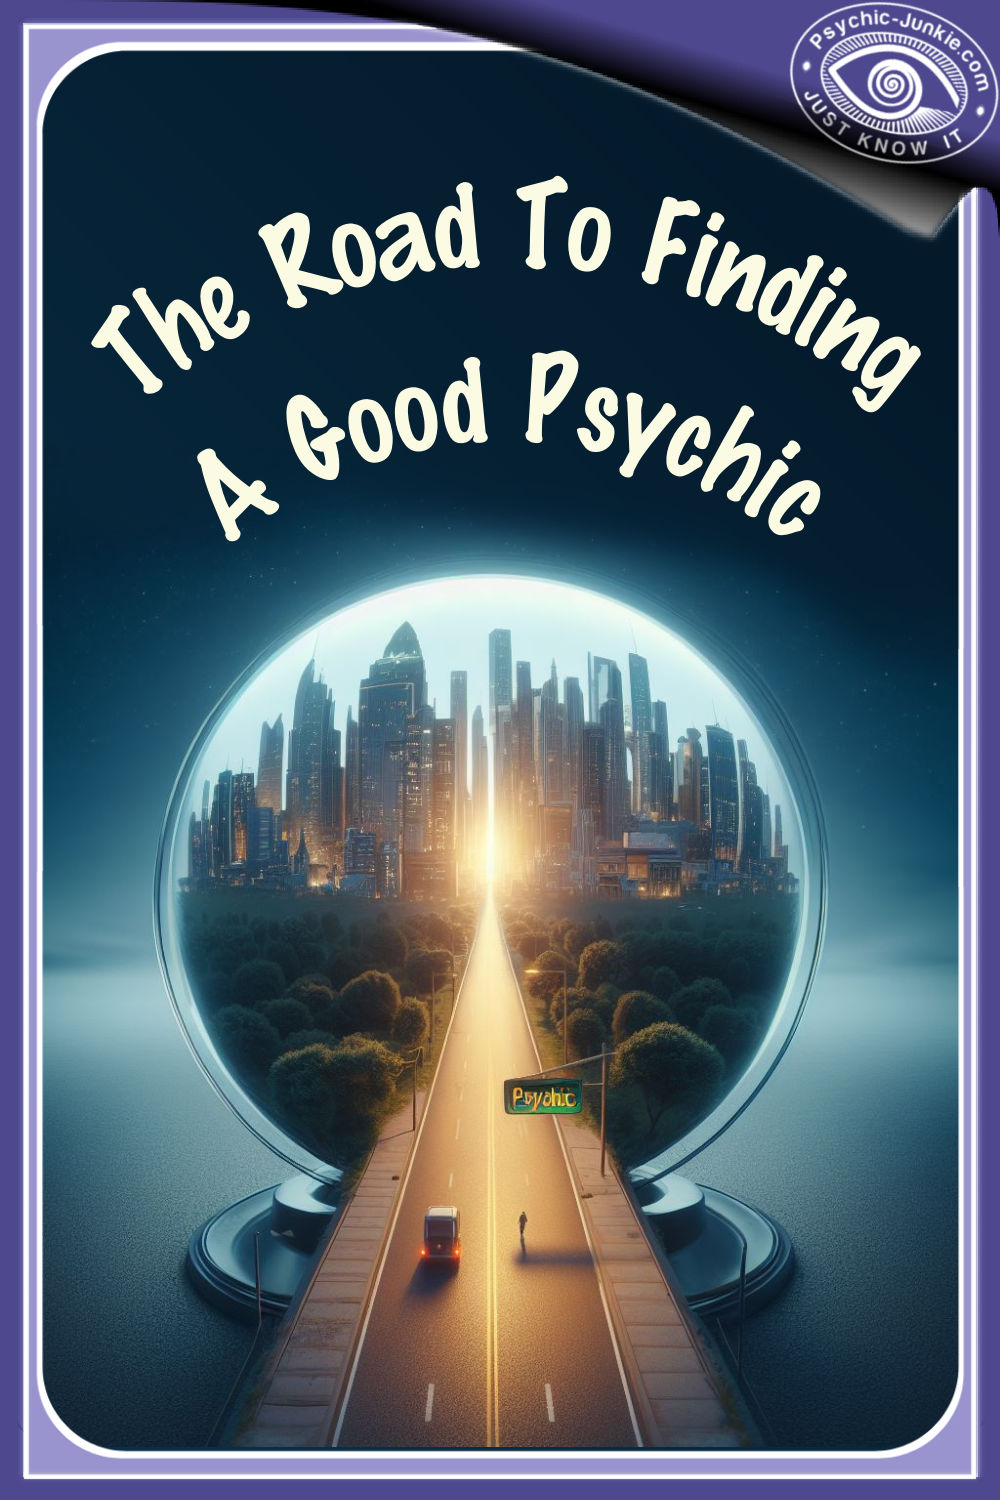 The road to finding a good psychic.